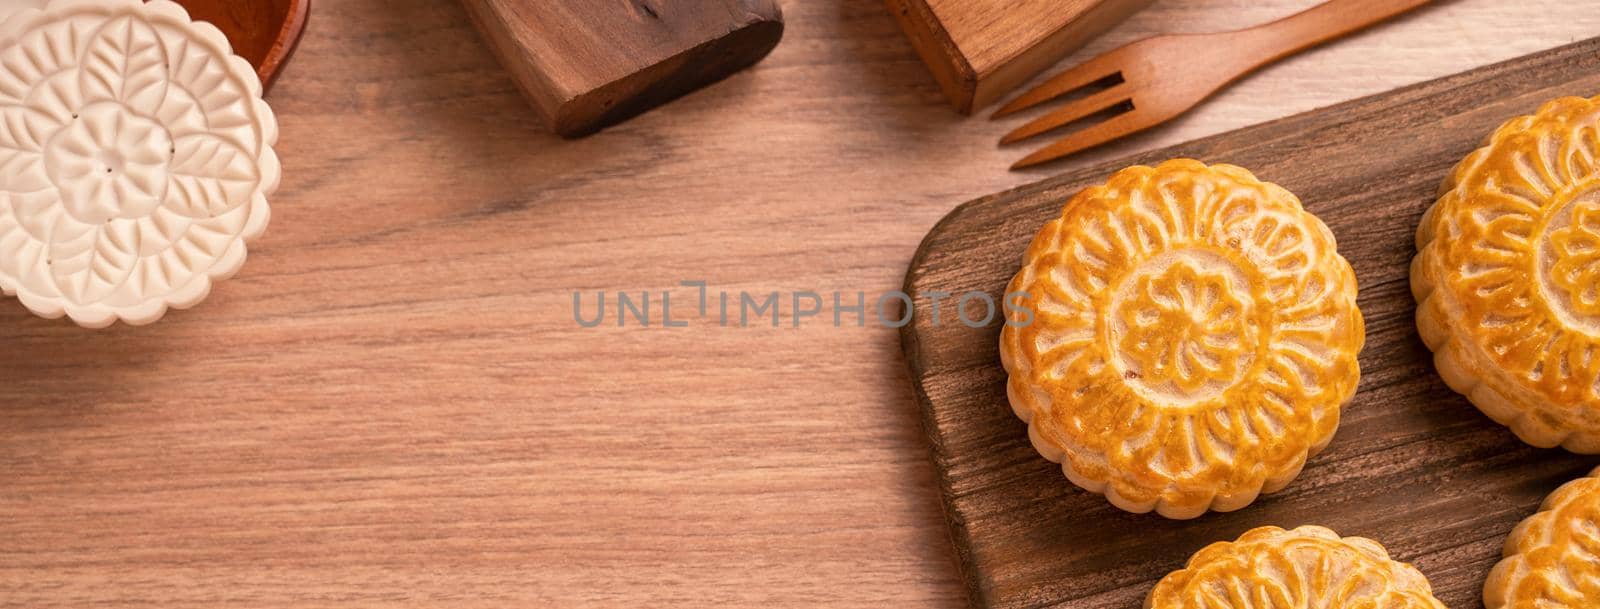 Round shaped moon cake Mooncake - Chinese style pastry during Mid-Autumn Festival / Moon Festival on wooden background and tray, top view, flat lay. by ROMIXIMAGE